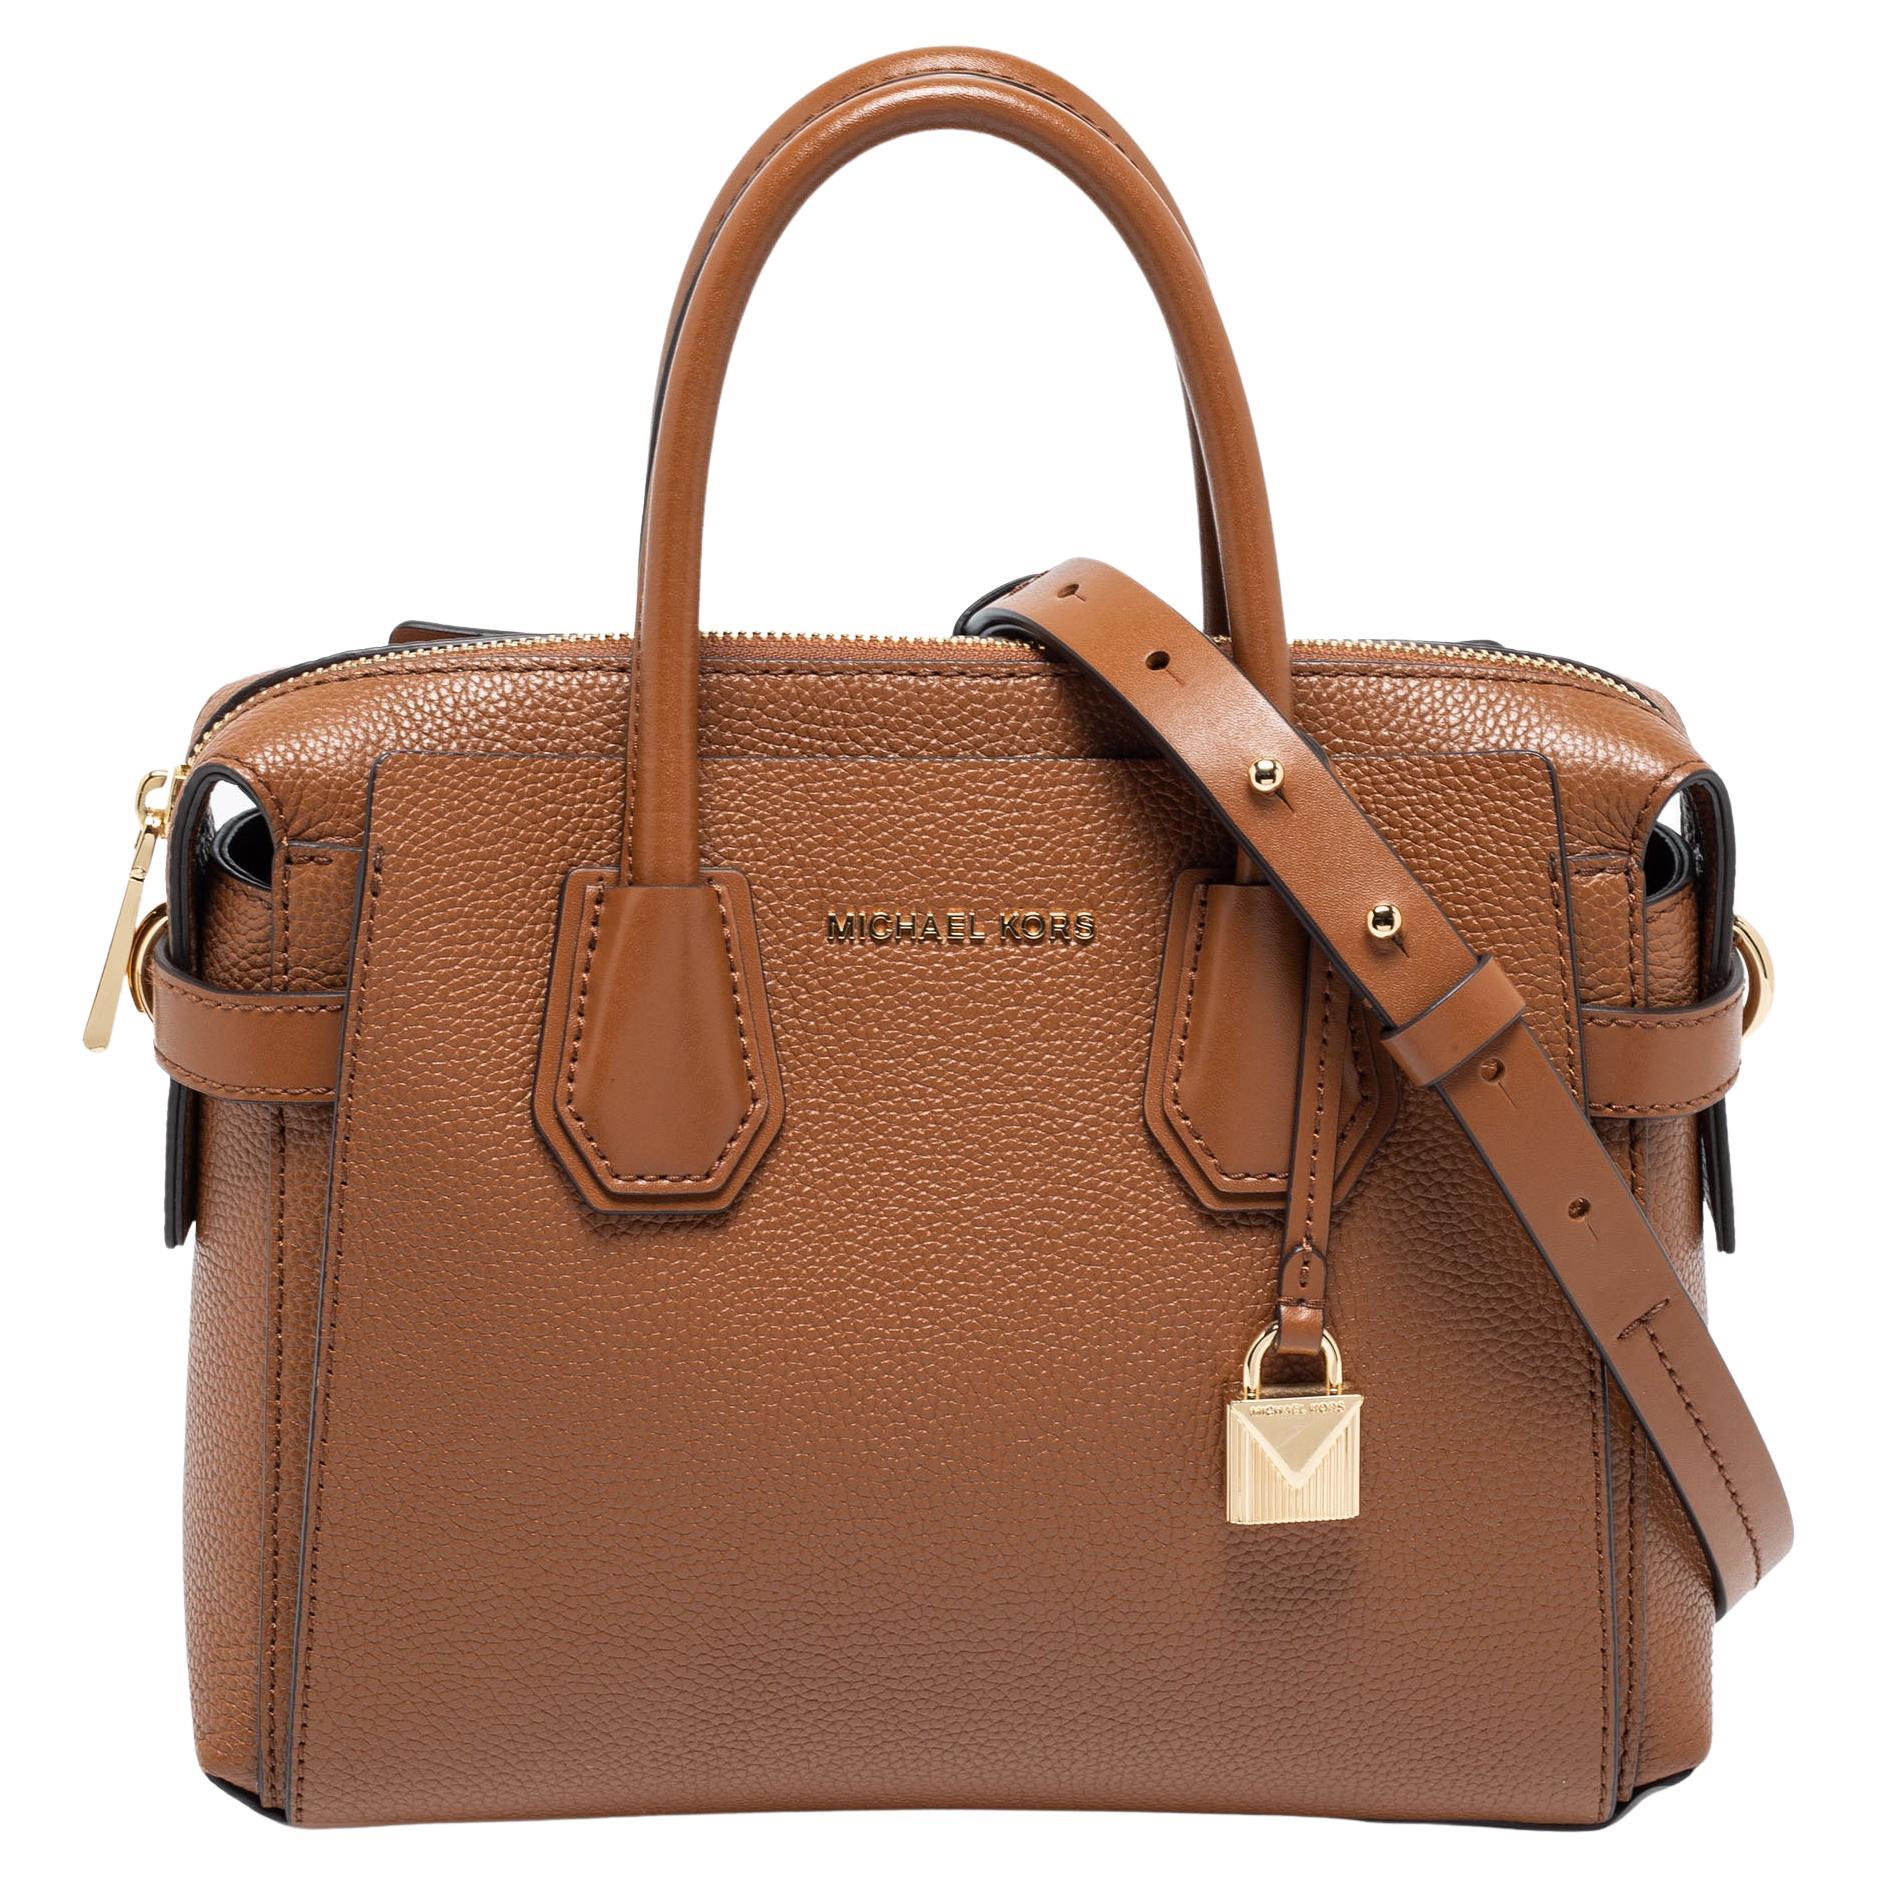 Michael Kors Tan Leather Small Mercer Belted Tote